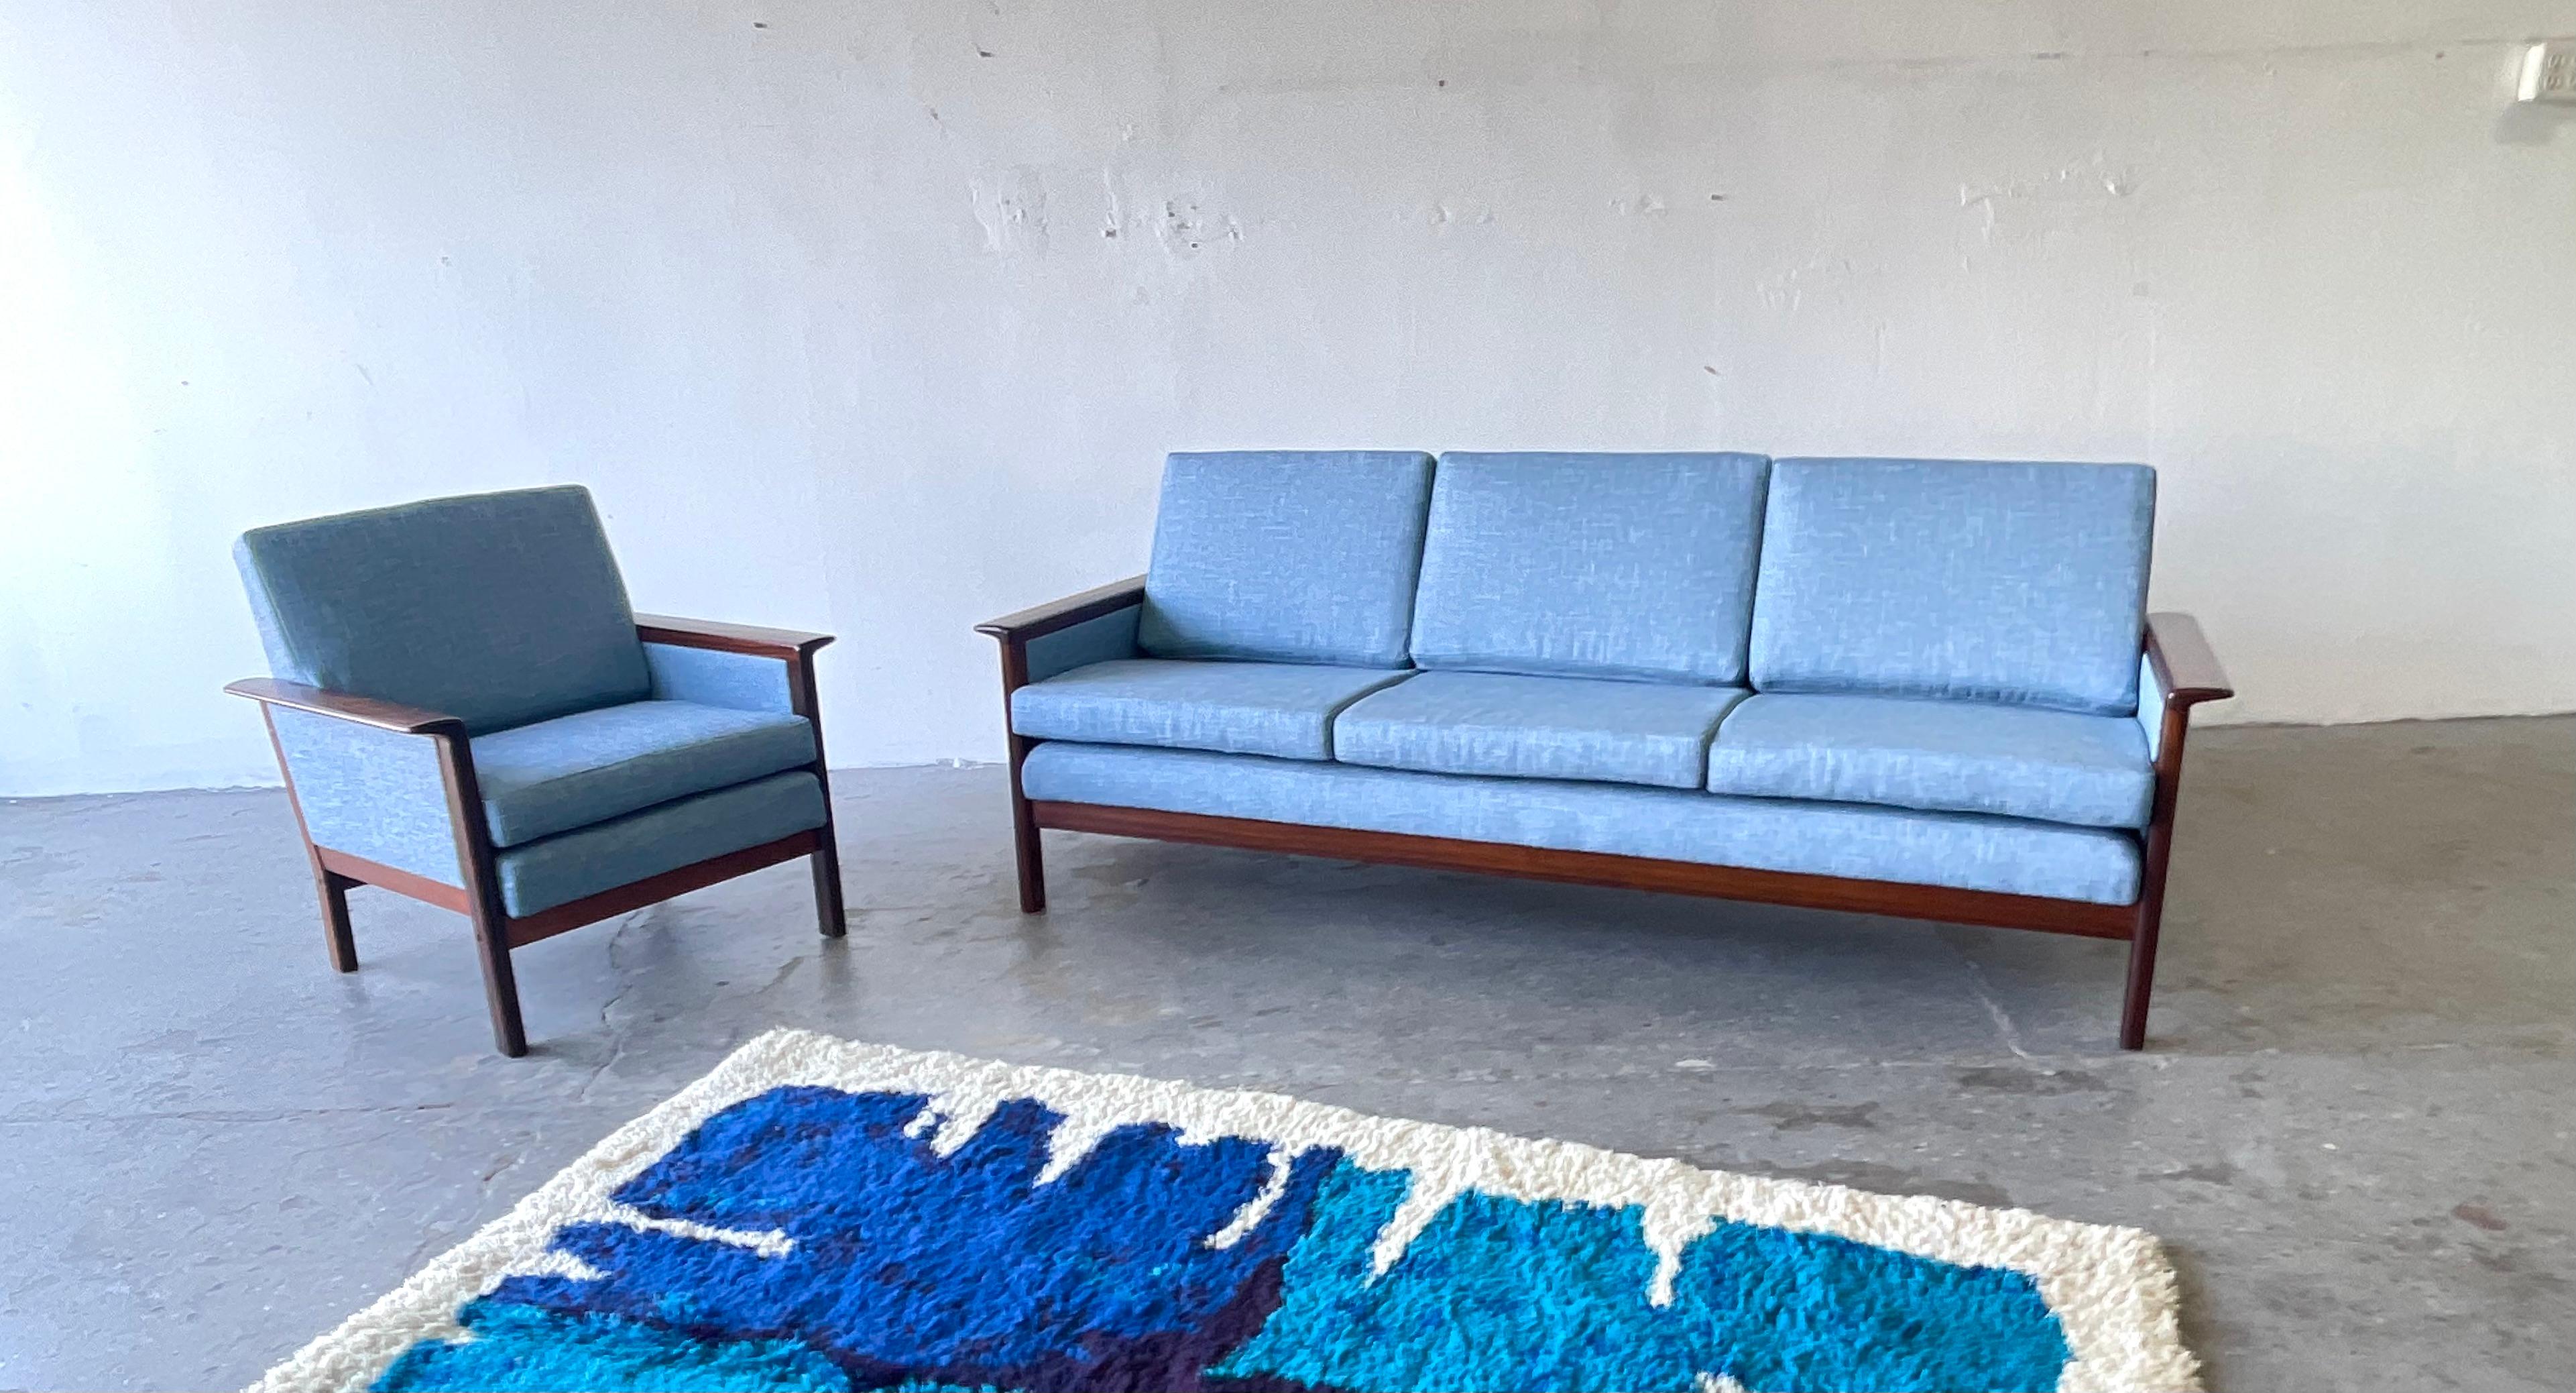 Vintage Danish Mid-Century Modern rosewood sofa & lounge easy chair by Westnofa 


Danish modern sofa and armchair by westnofa out of Norway The frame is made of solid rosewood and has a beautiful woodgrain 

Professionally refinished and